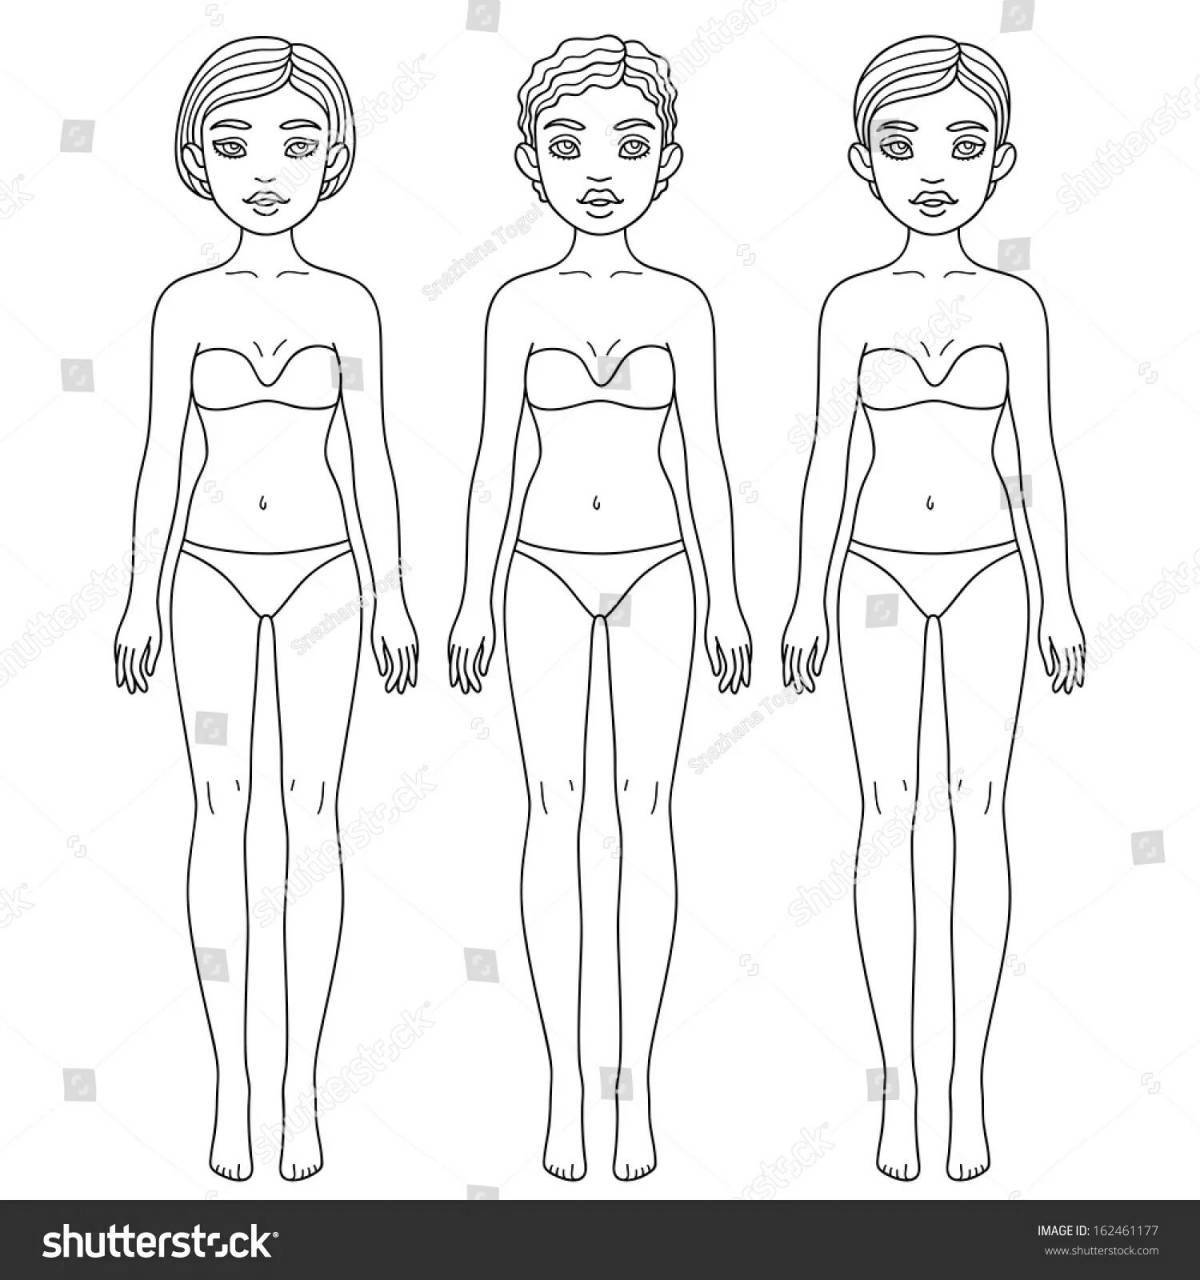 Coloring page funny doll in a bathing suit